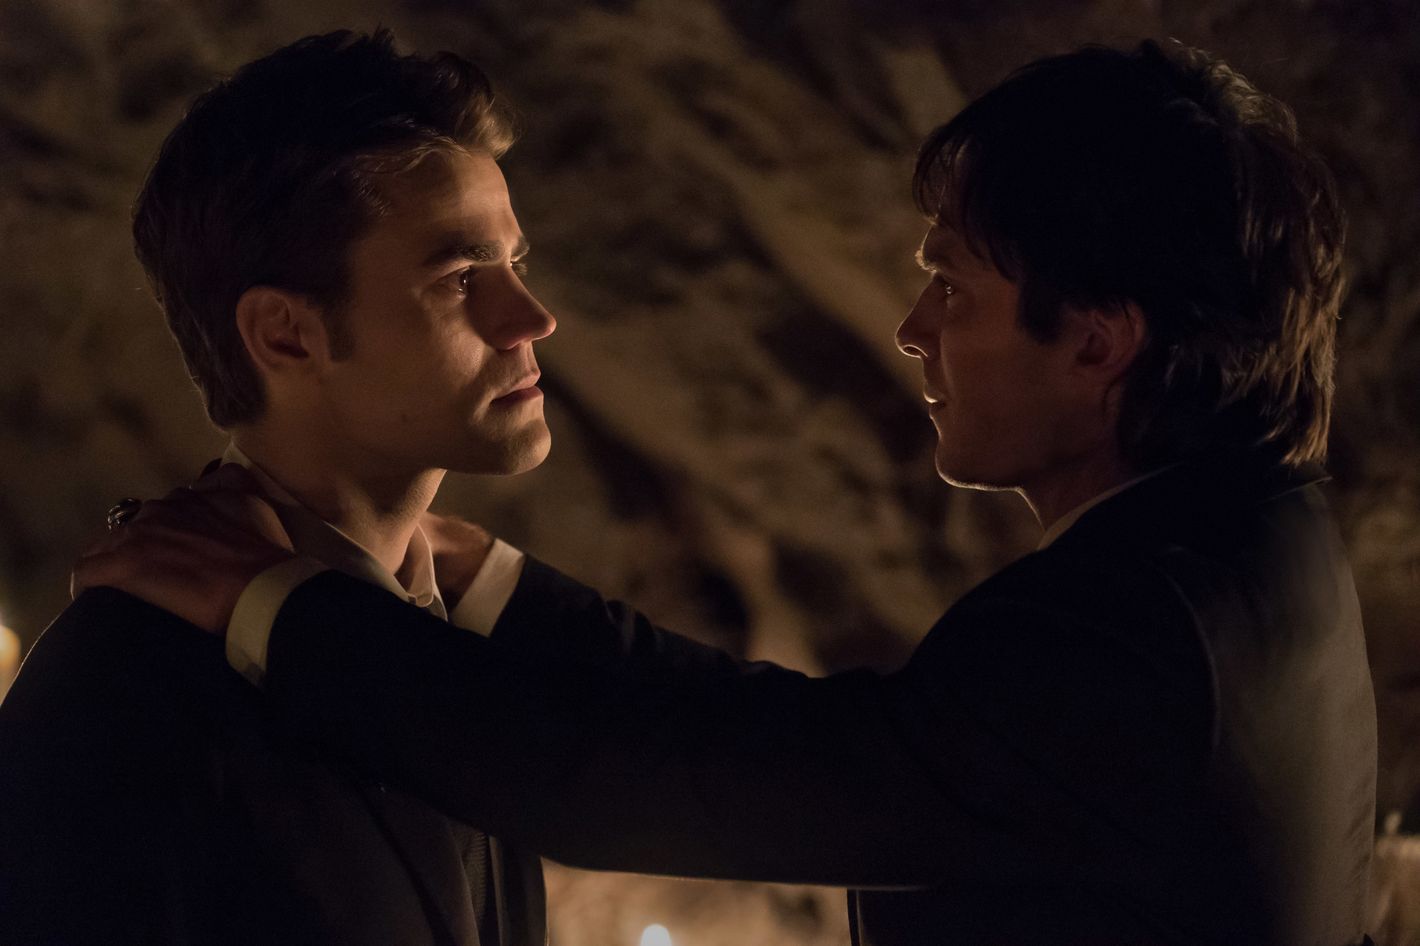 15 Vampire Diaries Questions We Still Need Answered